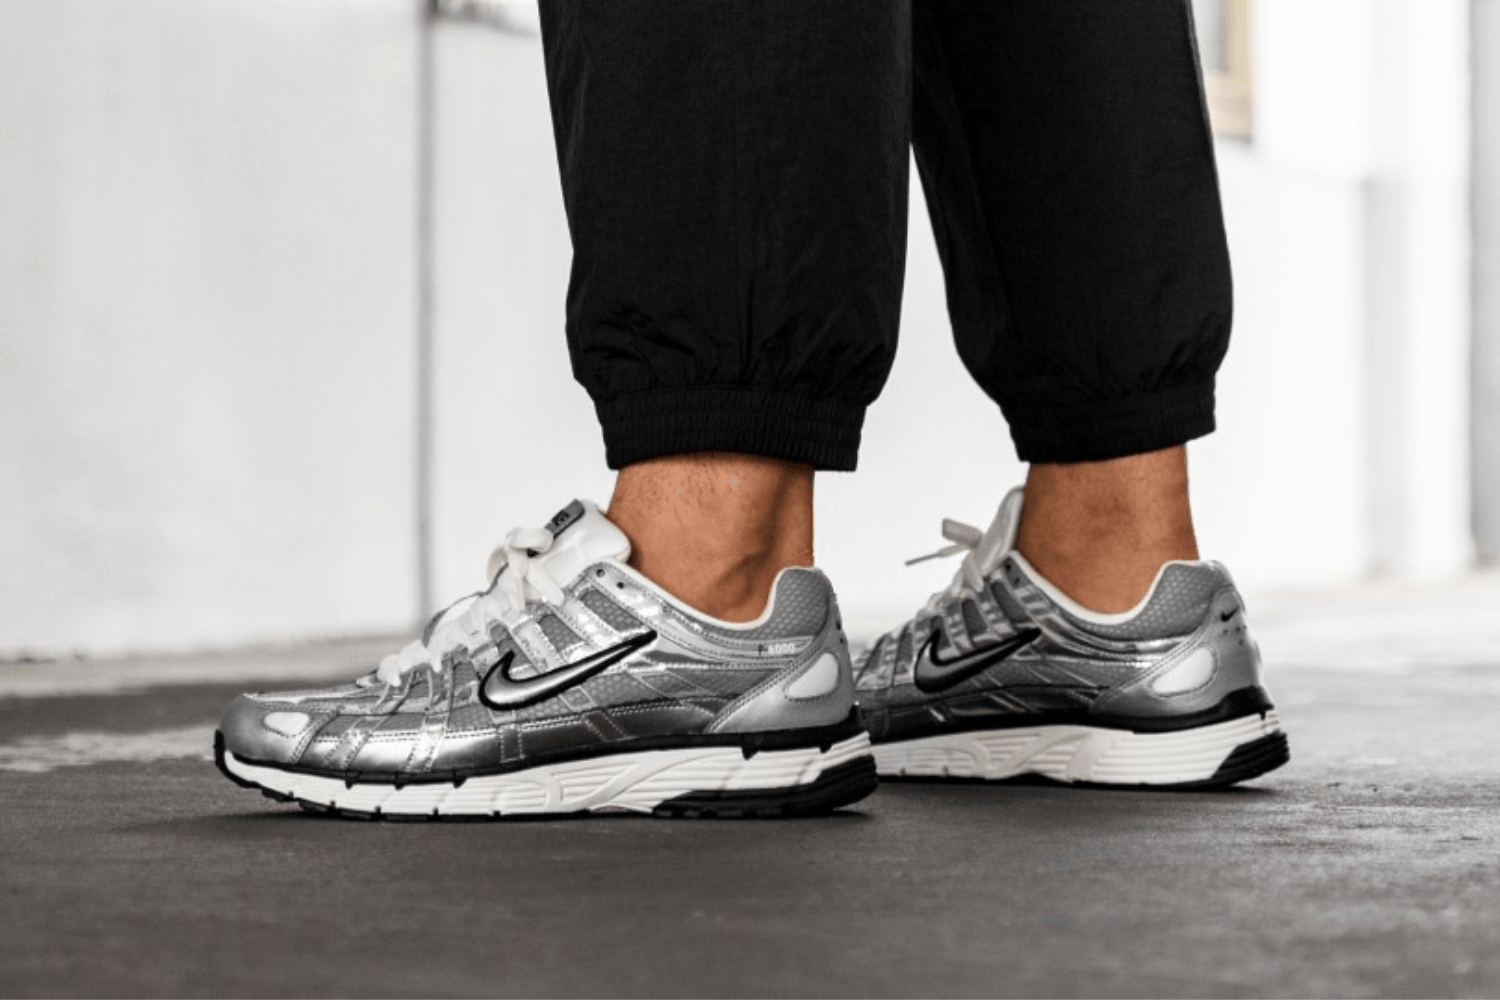 How to style the Nike P-6000